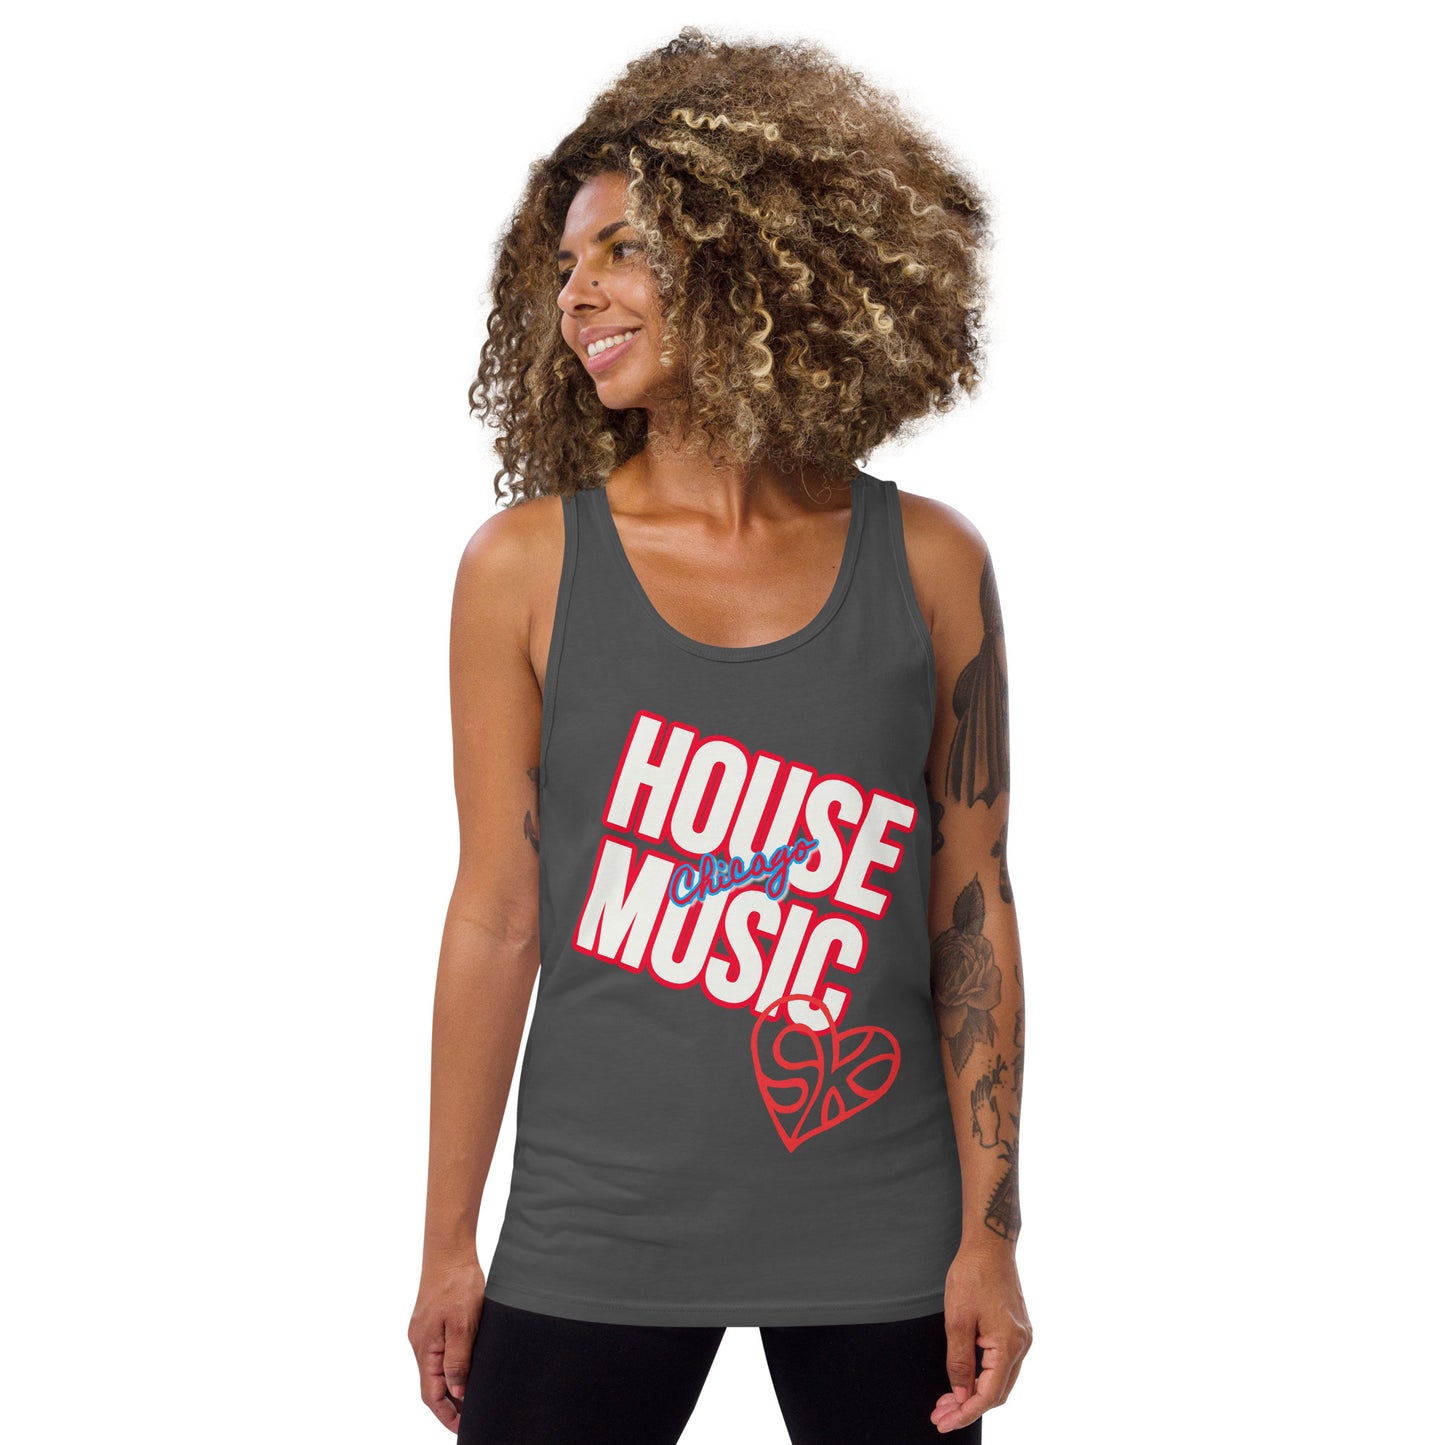 House Music Tank - White Letters